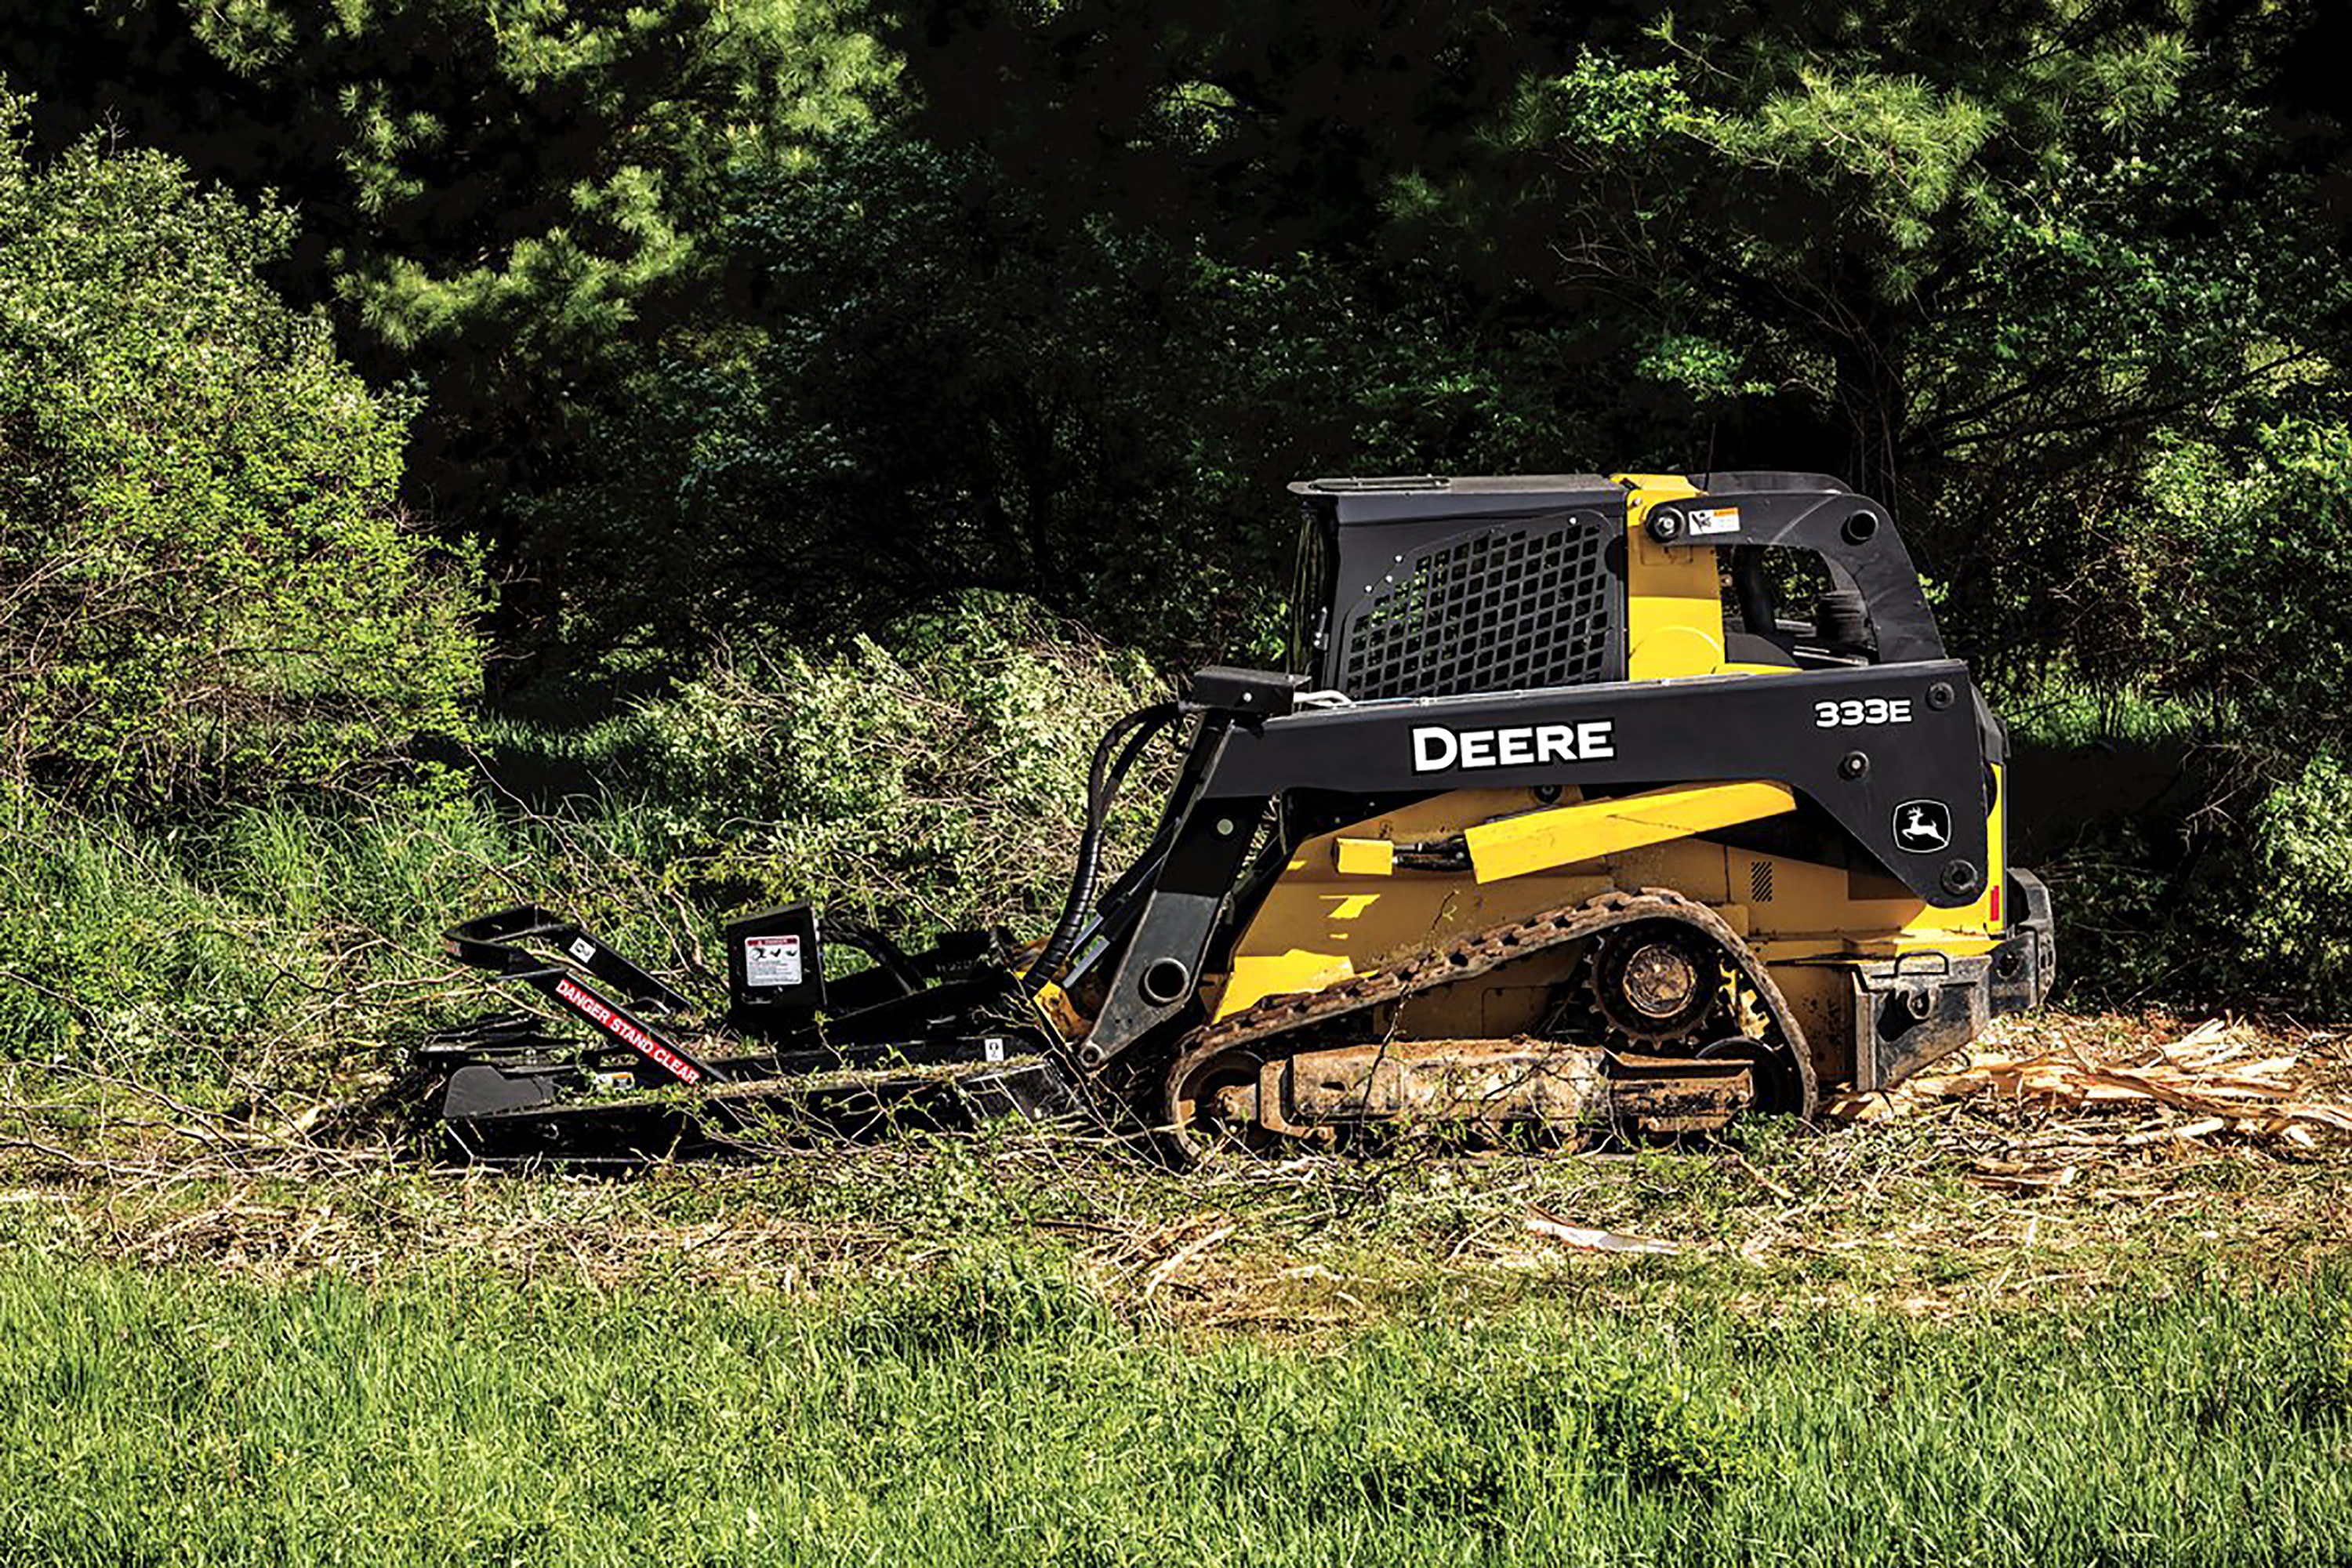 ... view of a John Deere CTL using an Extreme Duty Brush Cutter attachment